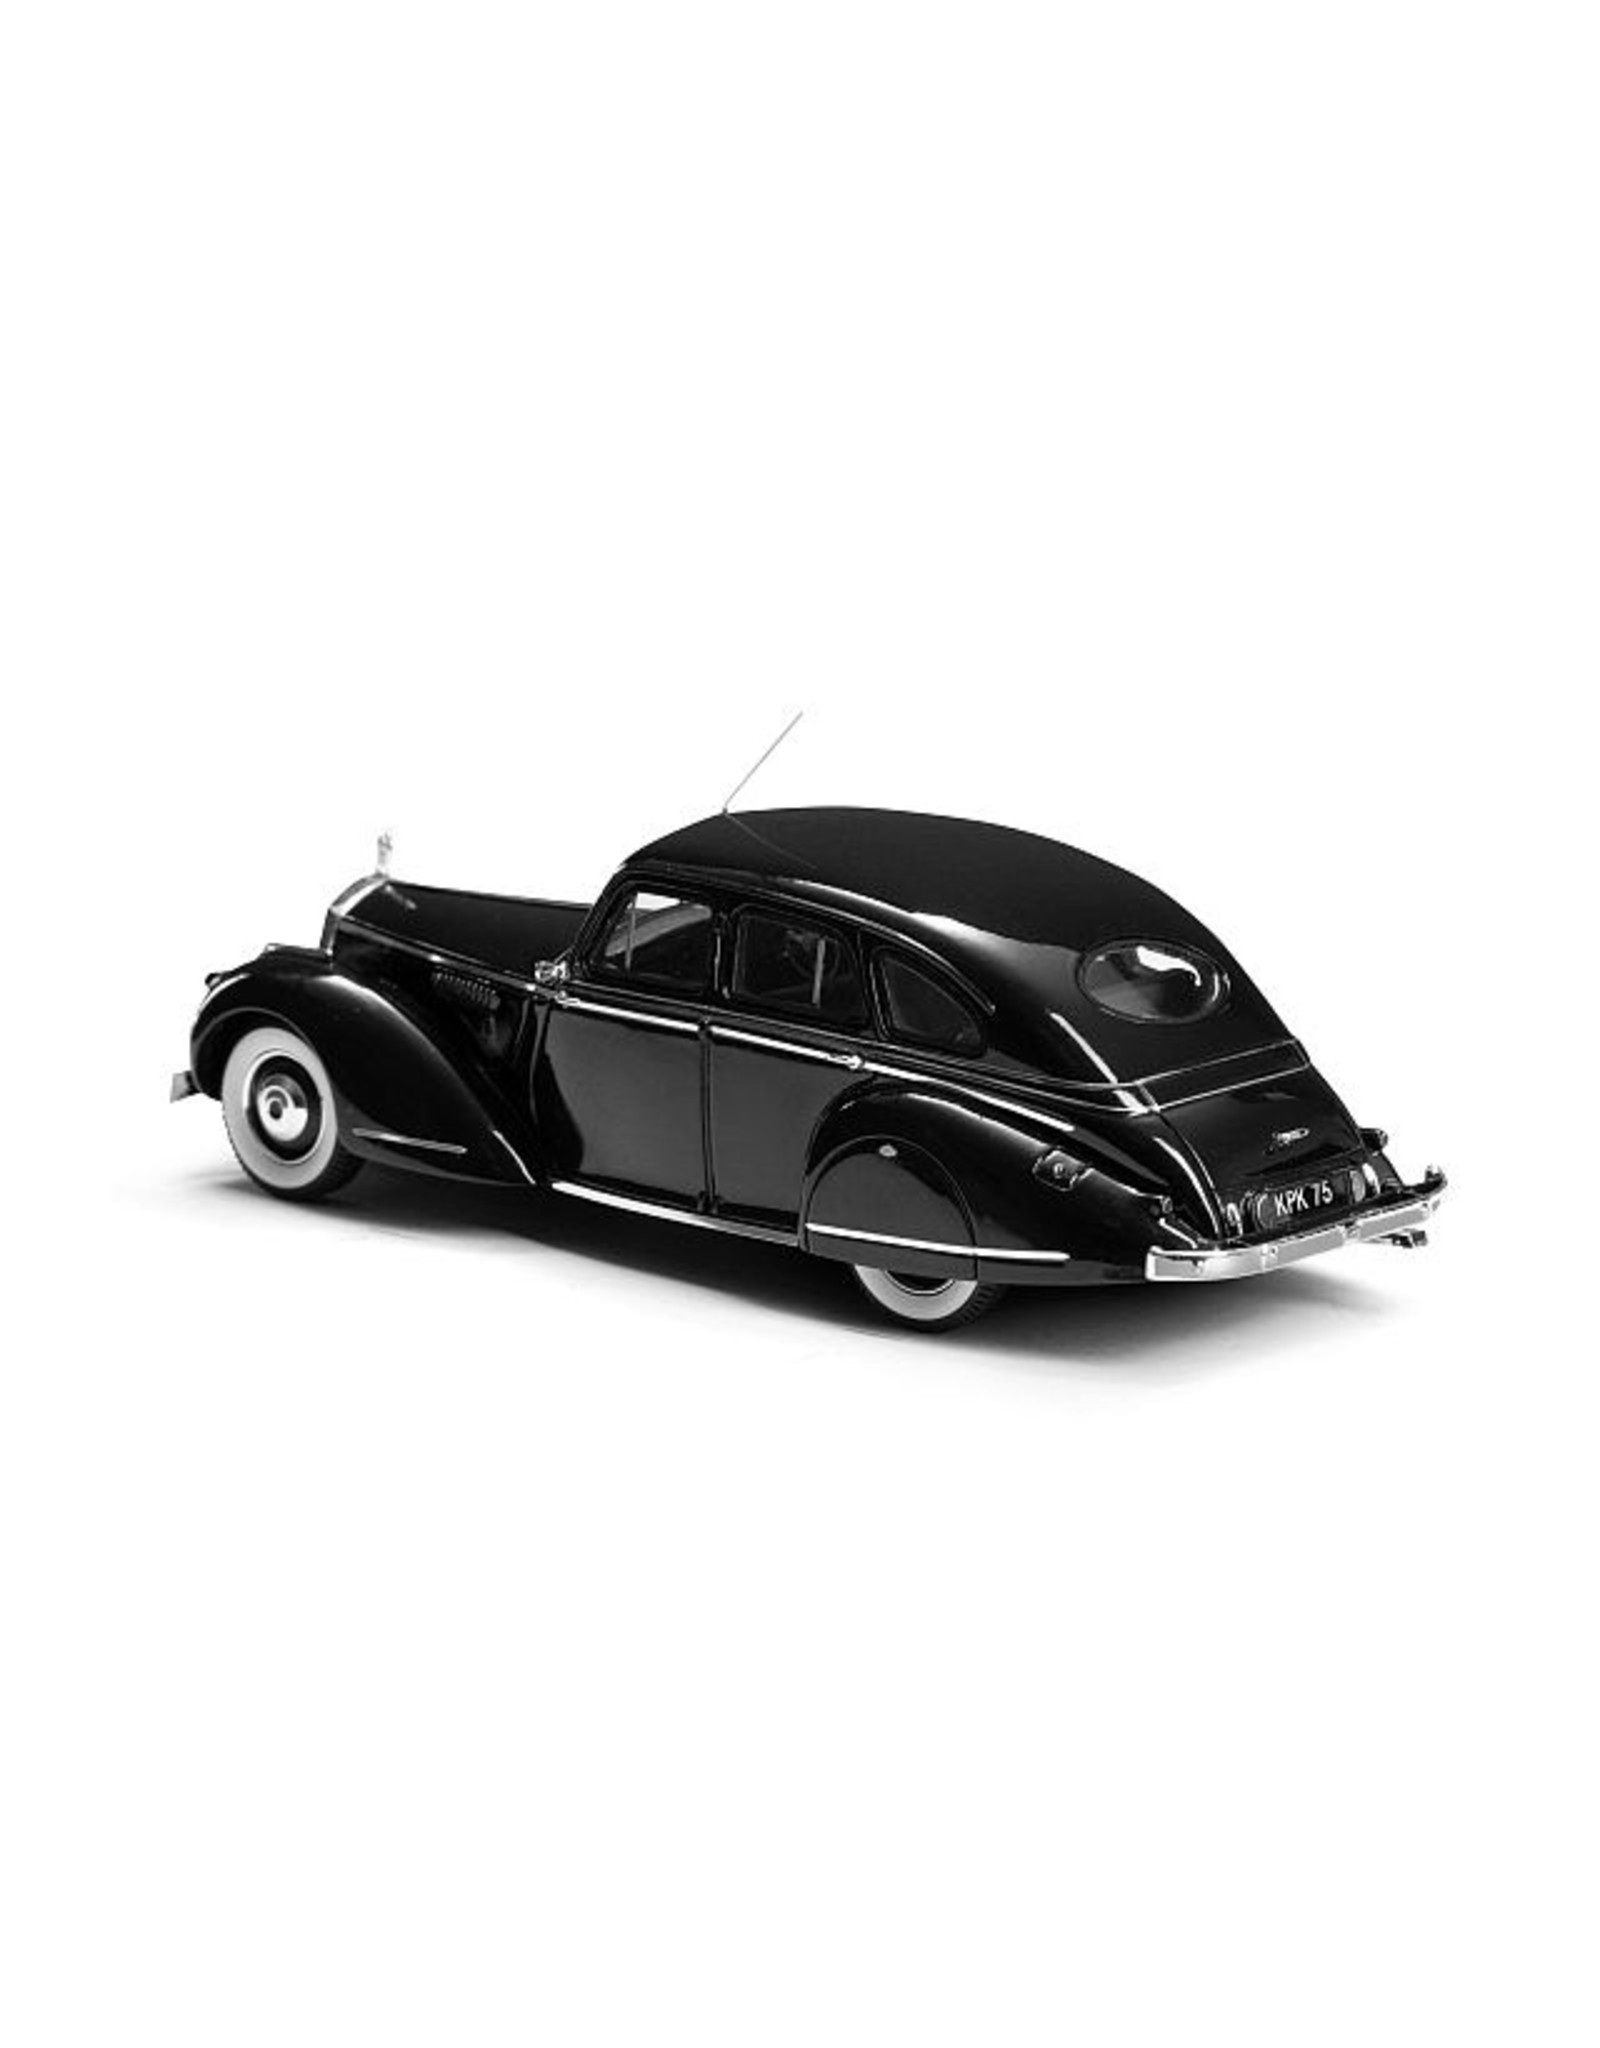 Invicta Invicta Black Price by Charlesworth-1948(with headlights built into fenders and bumpers)black